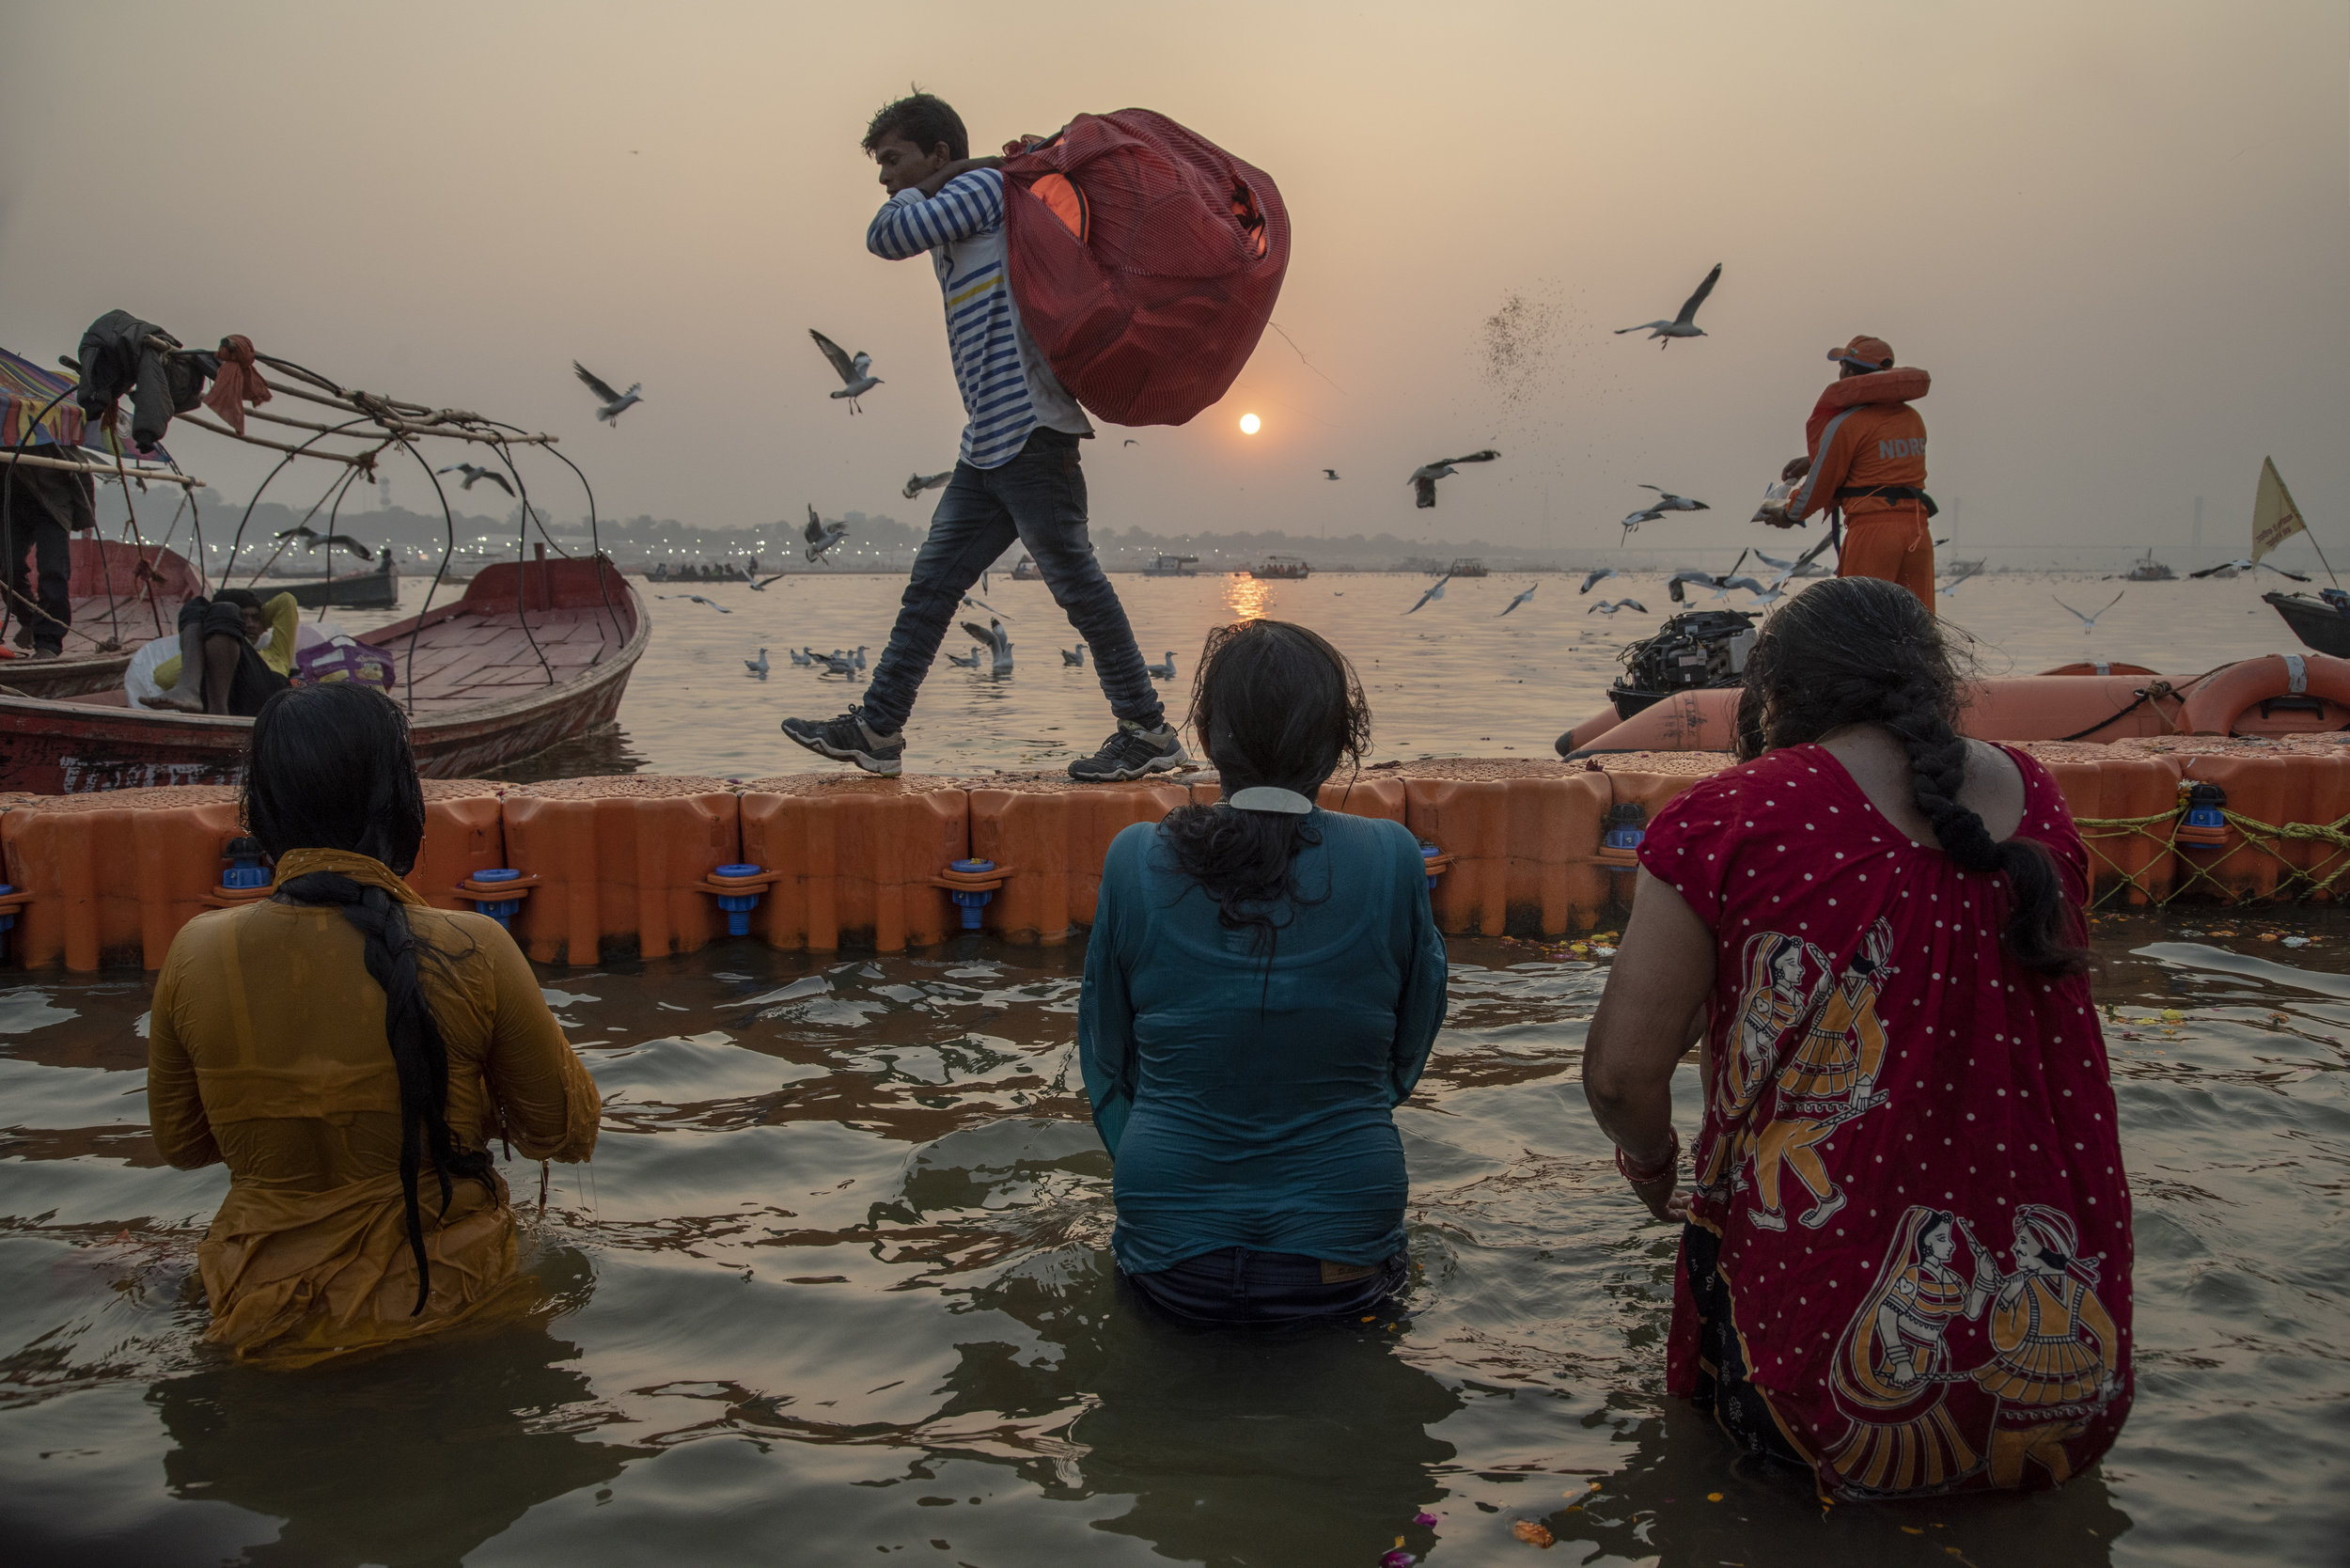  Three women bathe in the Ganges. A man carries life jackets along the barrier. Another tosses seed to the birds. Here at the rivers edge life gives and it receives. It preserves and purifies. 